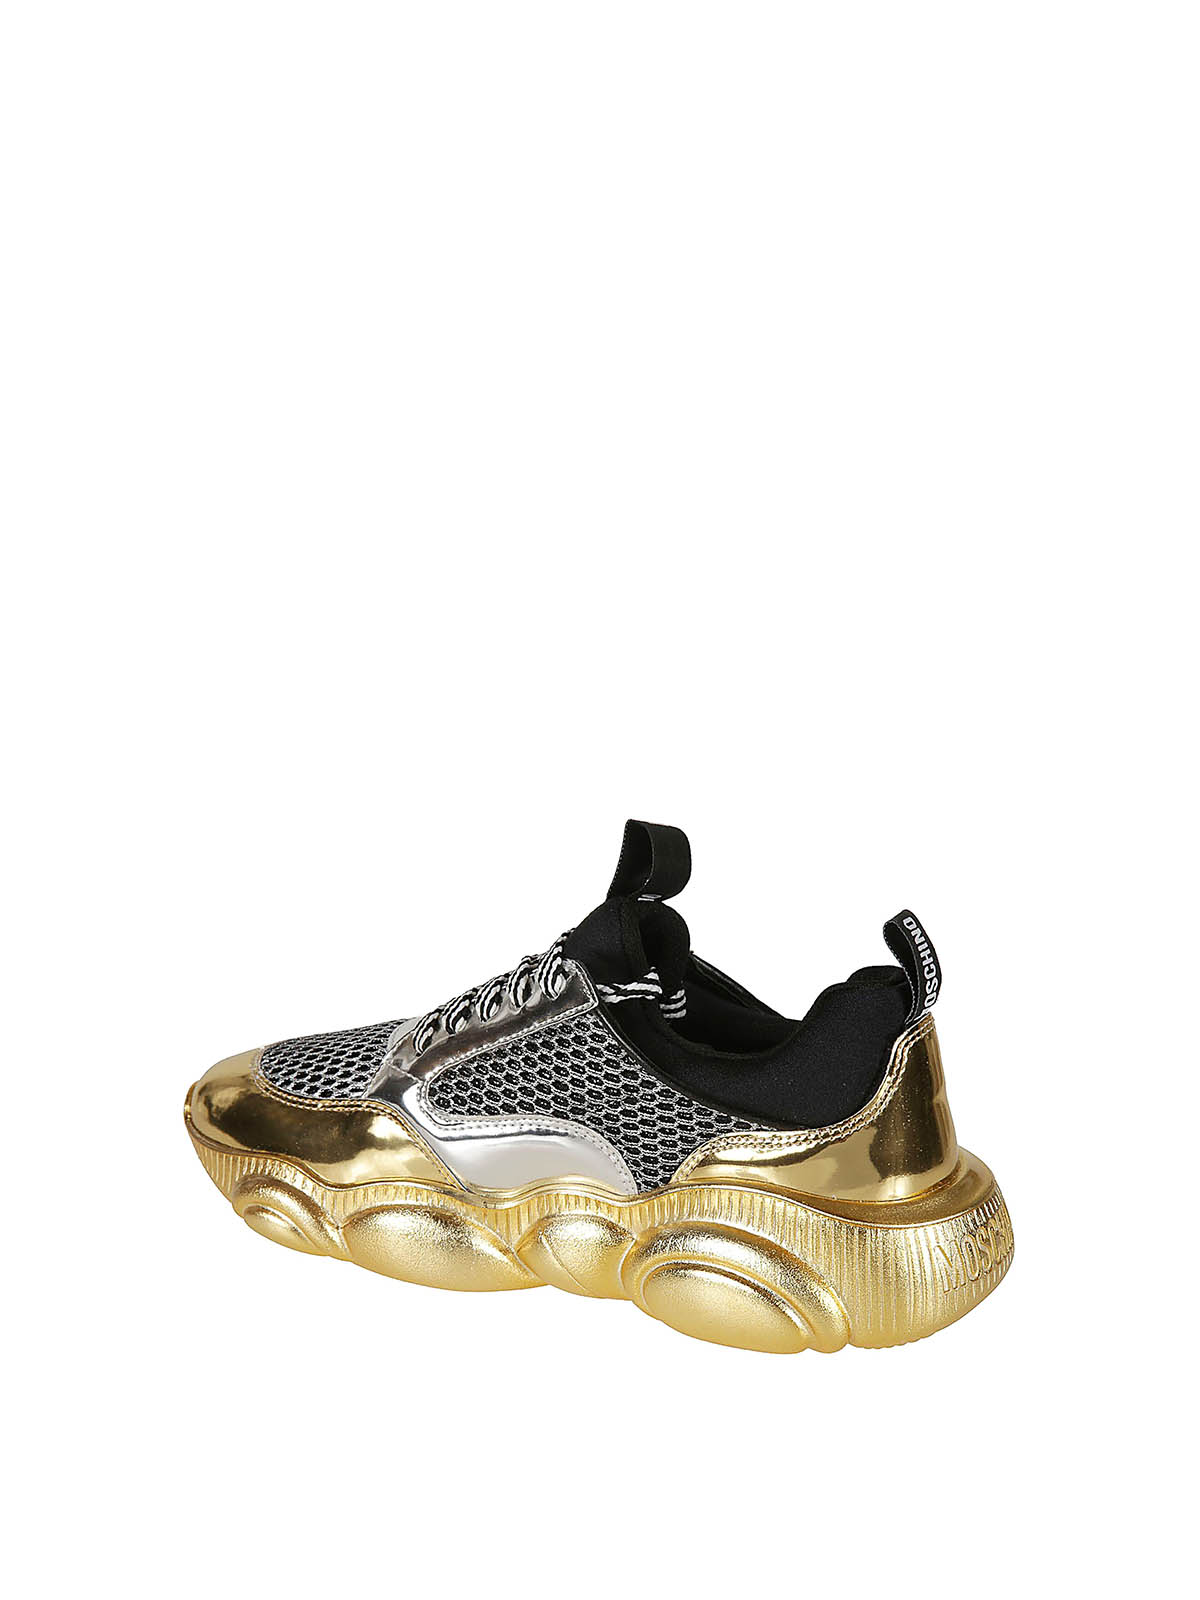 moschino gold shoes